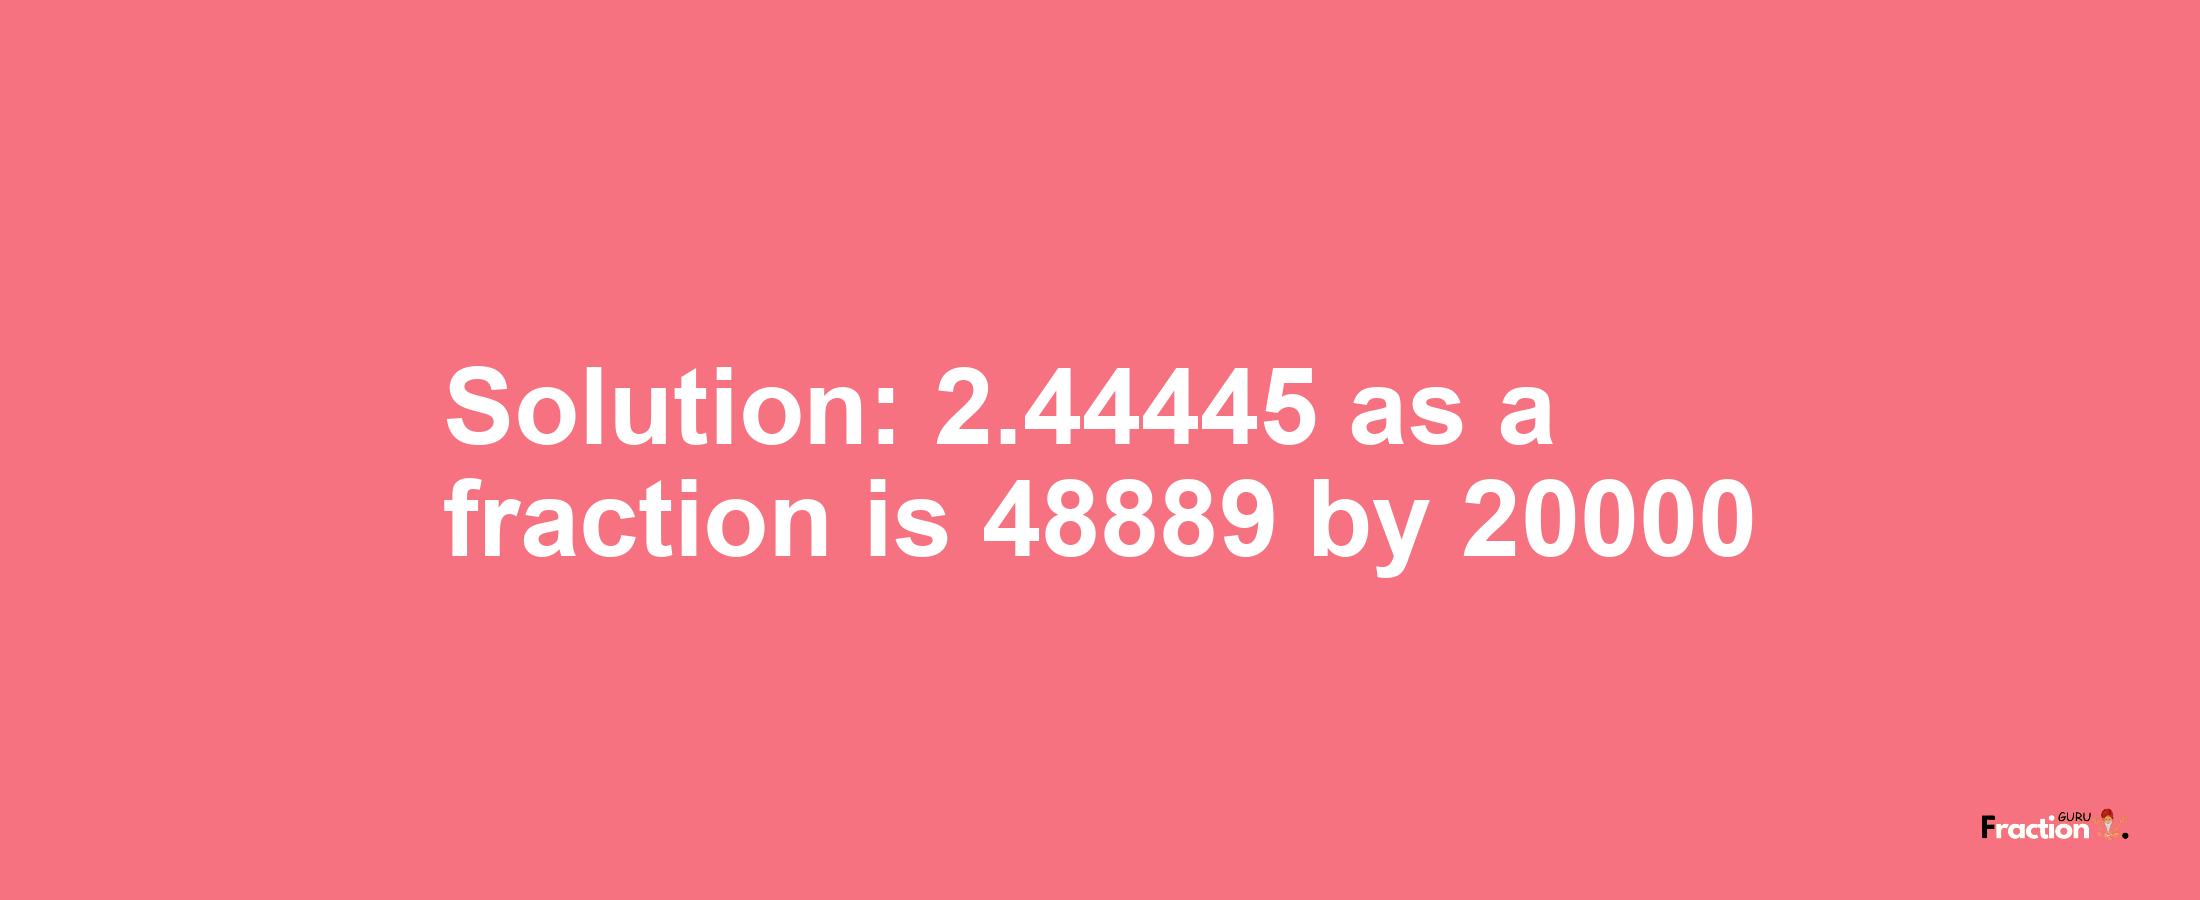 Solution:2.44445 as a fraction is 48889/20000